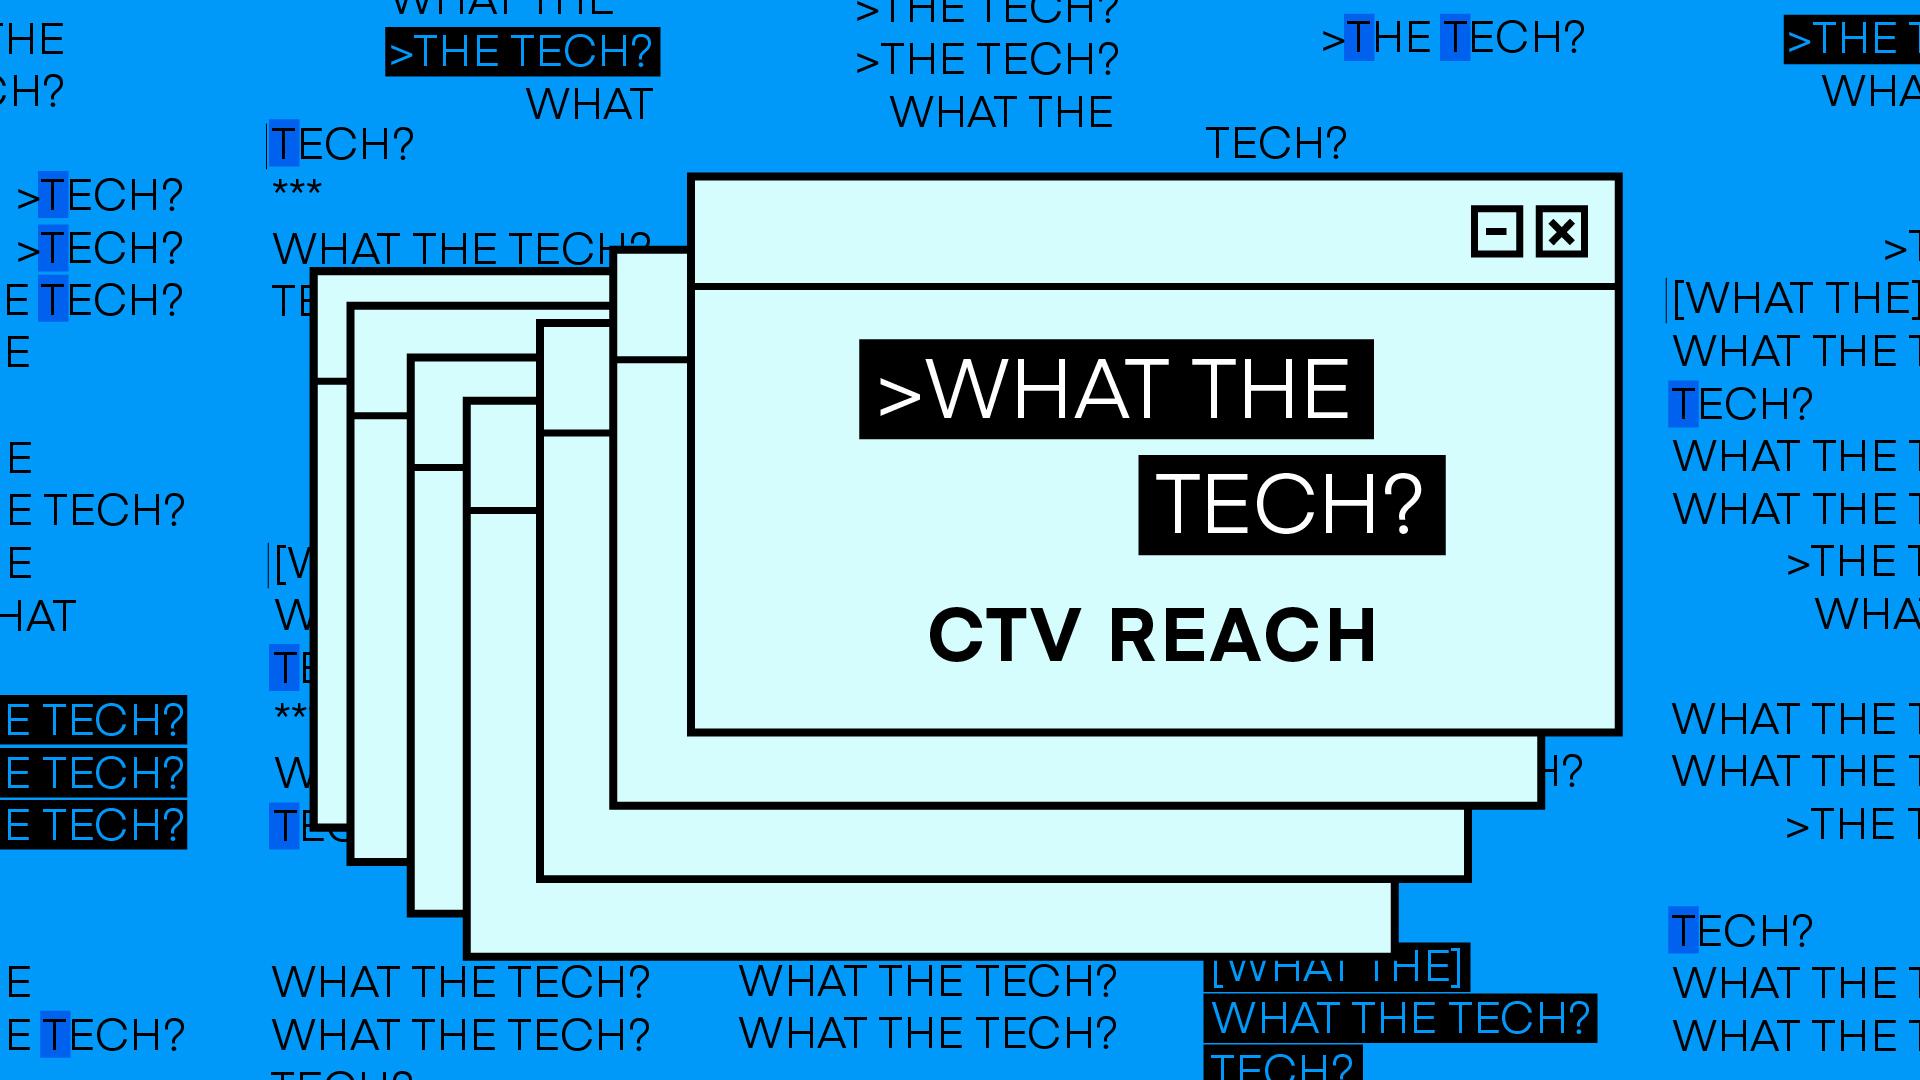 What the Tech is connected TV reach?